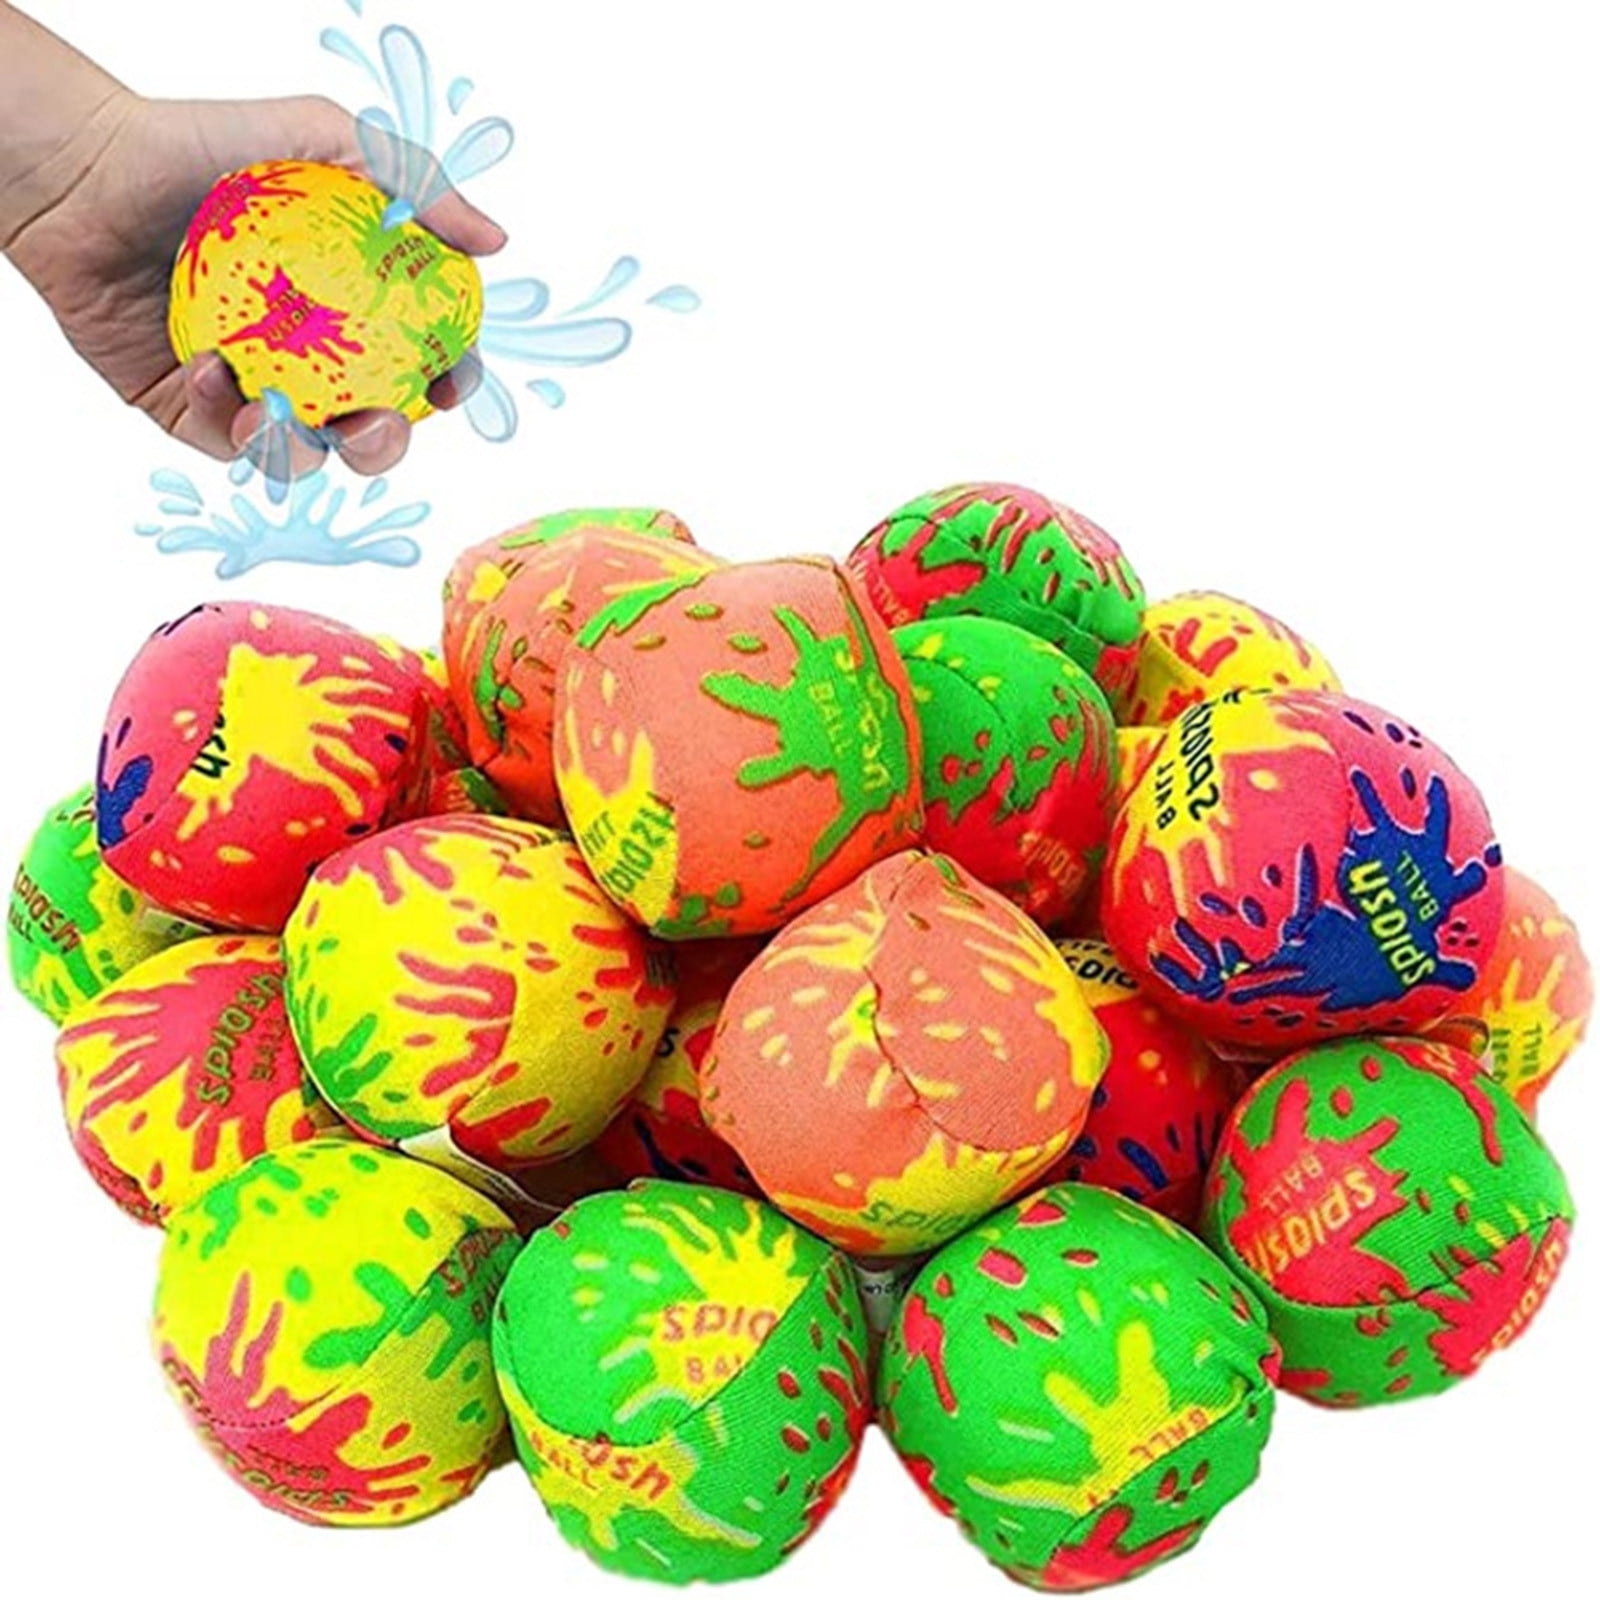 24PK Water Splash Balls Pool Toy Soaked Bomb Grenades Summer Party Toys 